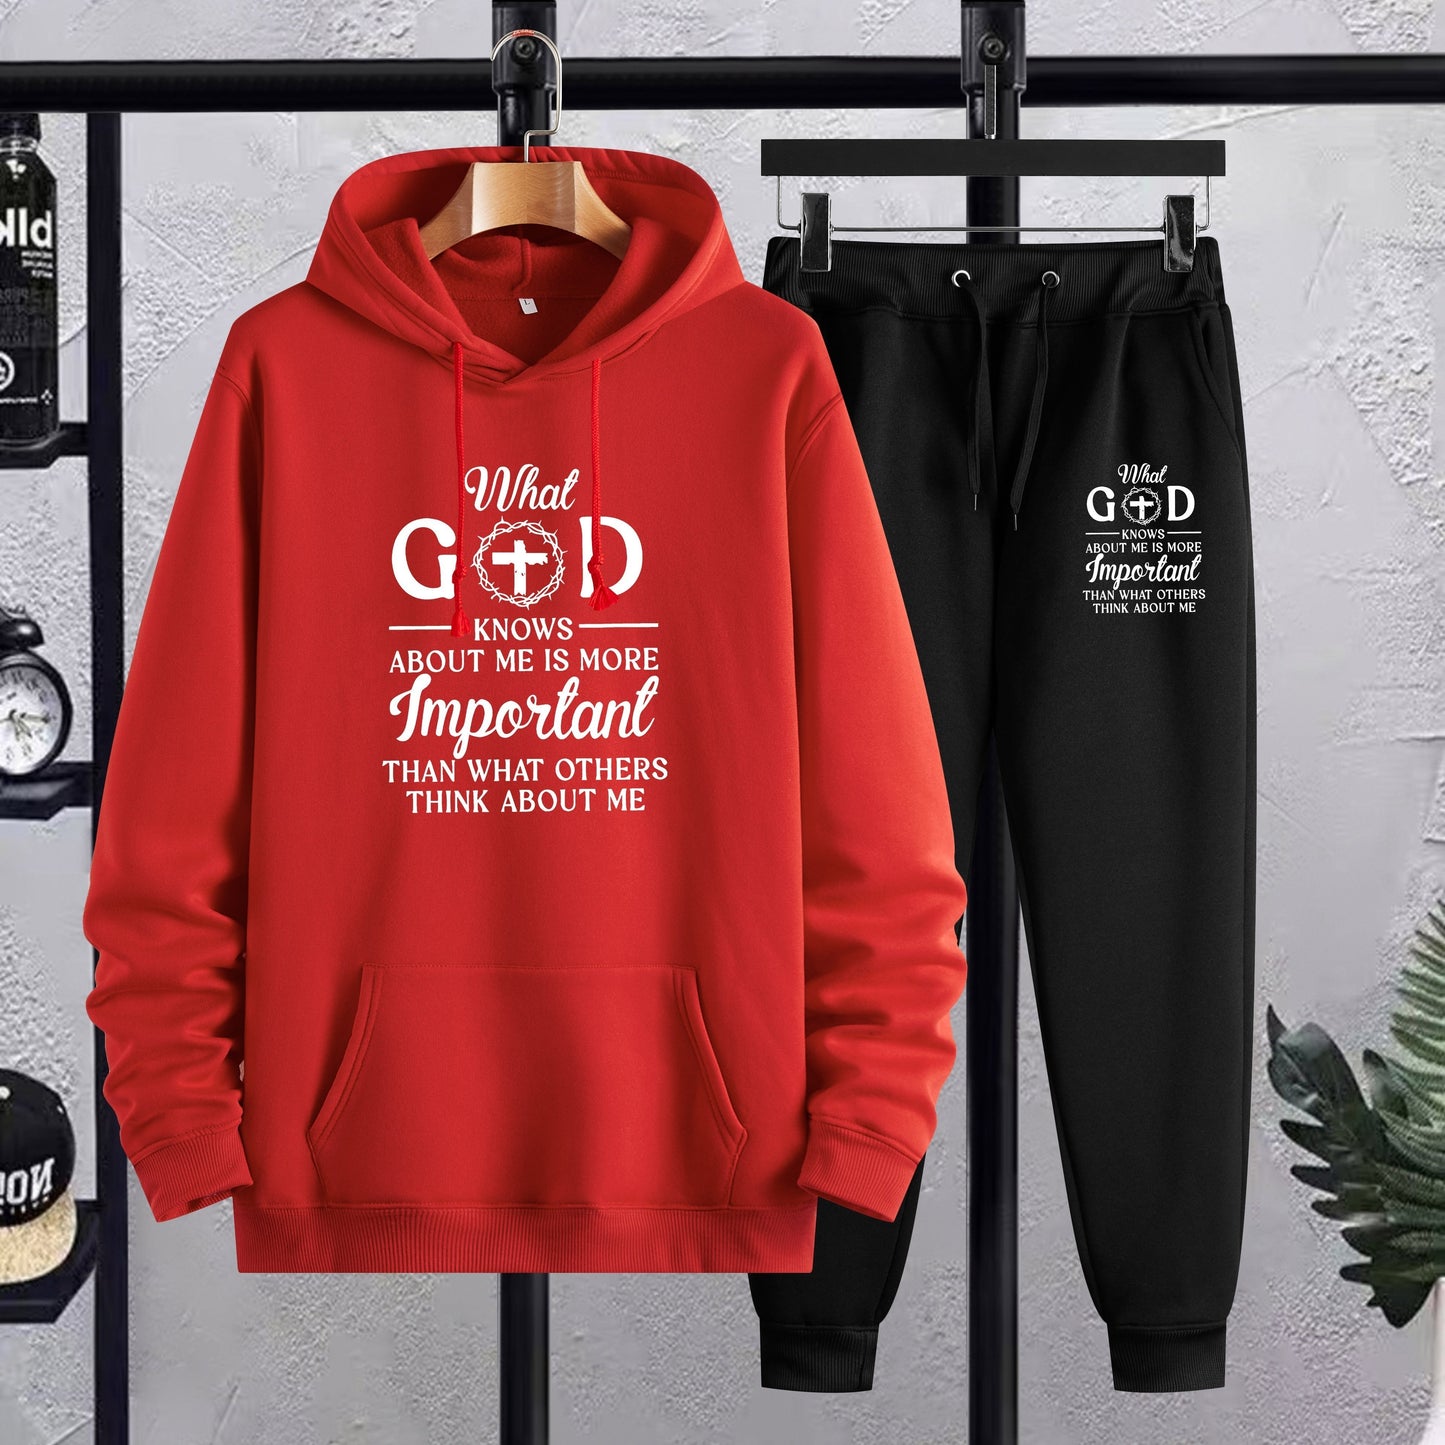 What God Knows About Me Is More Important Than What Others Think About Me Men's Christian Casual Outfit claimedbygoddesigns